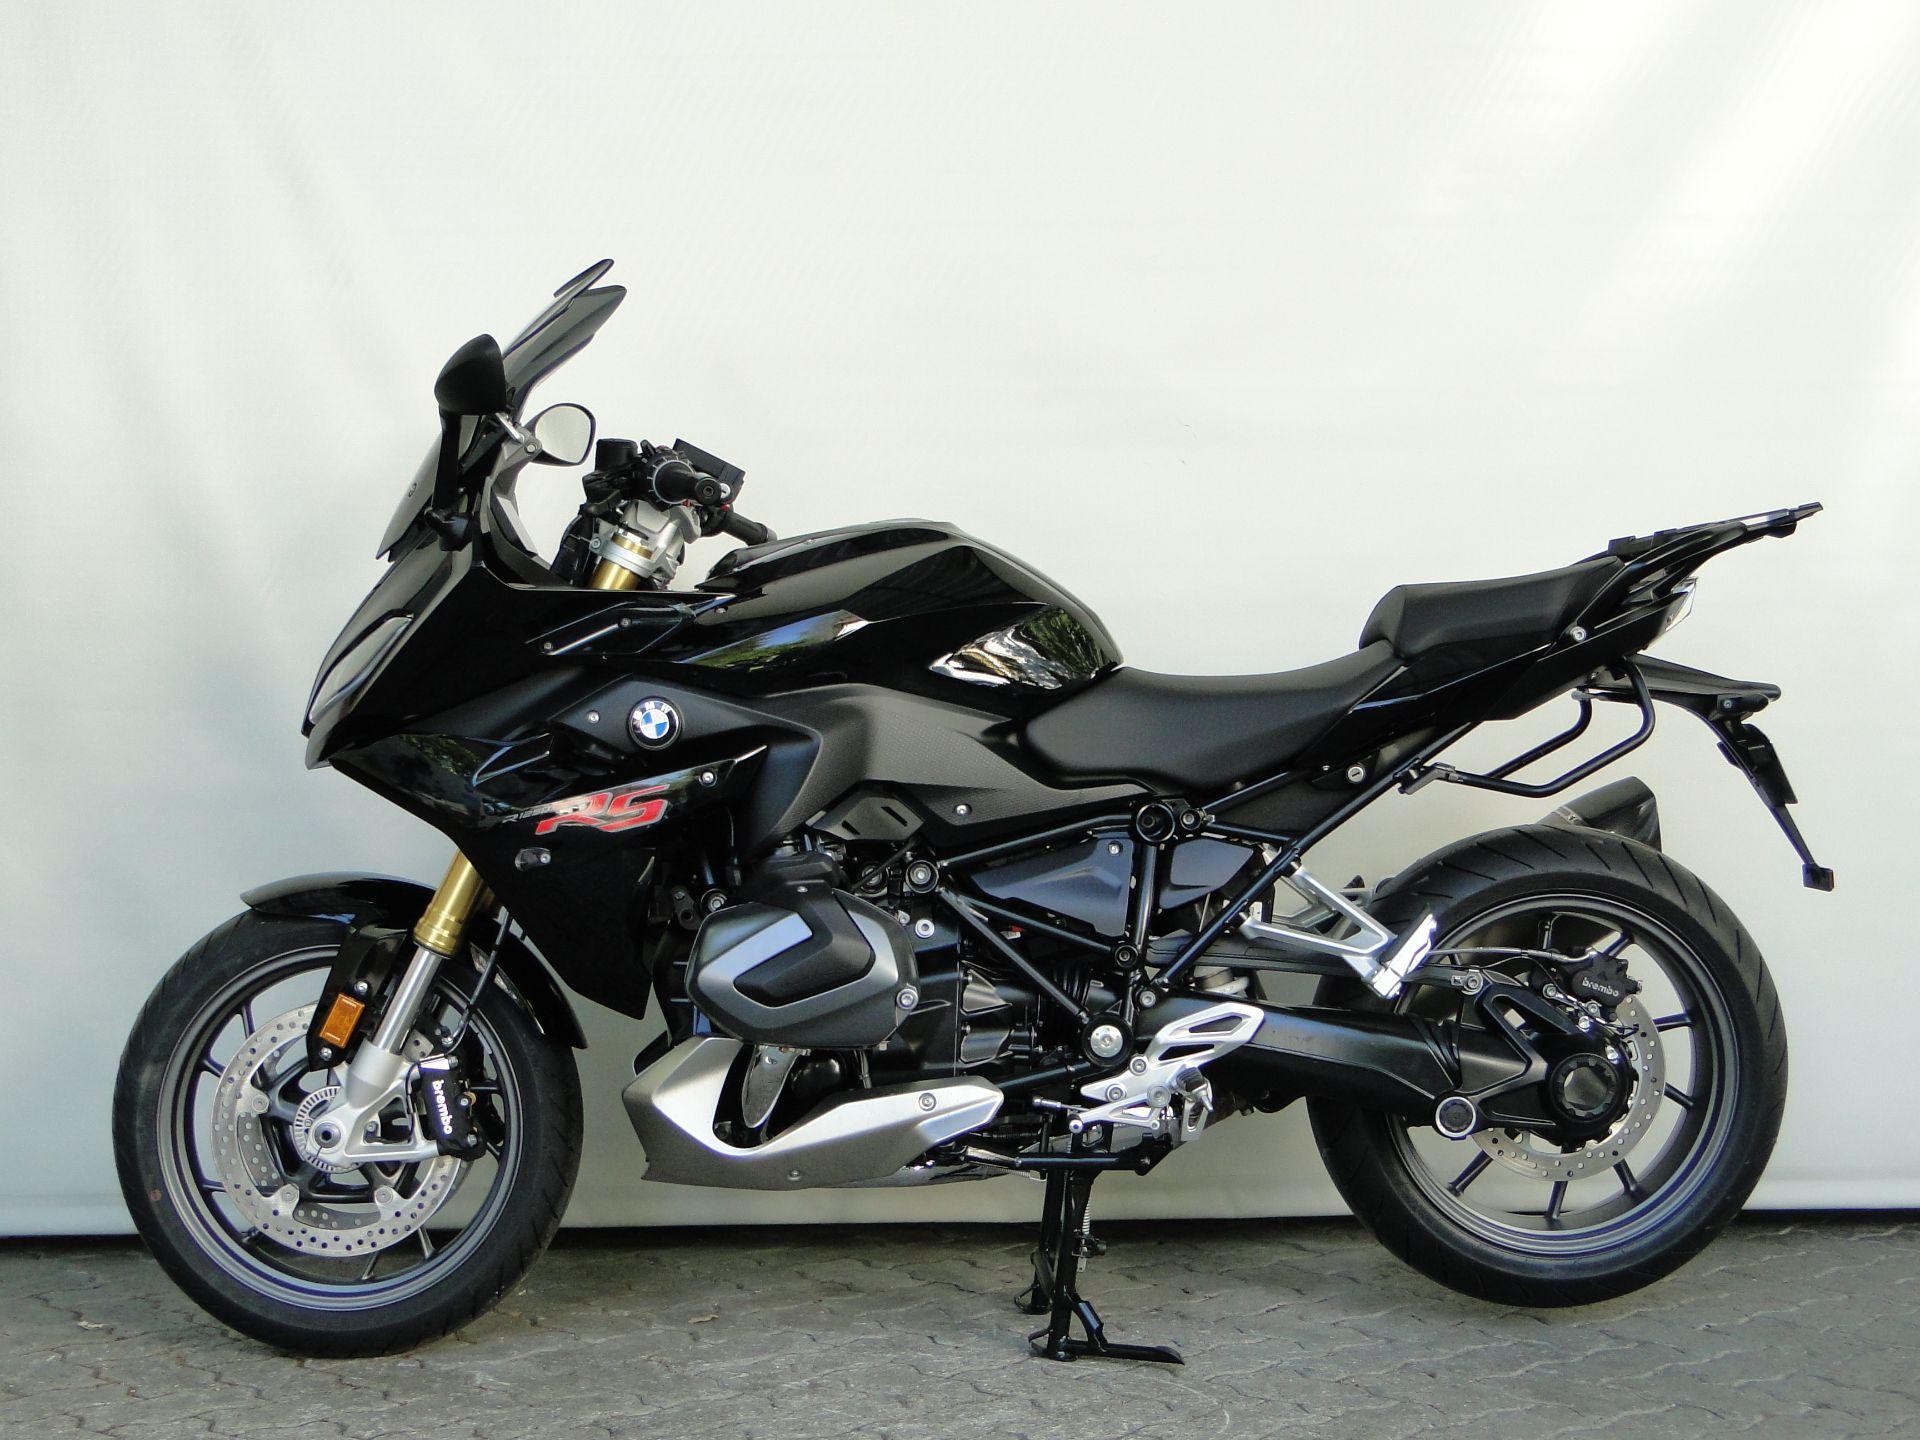 BMW R 1250 GS Pro BS6 Price, Images, Mileage, Specs & Features